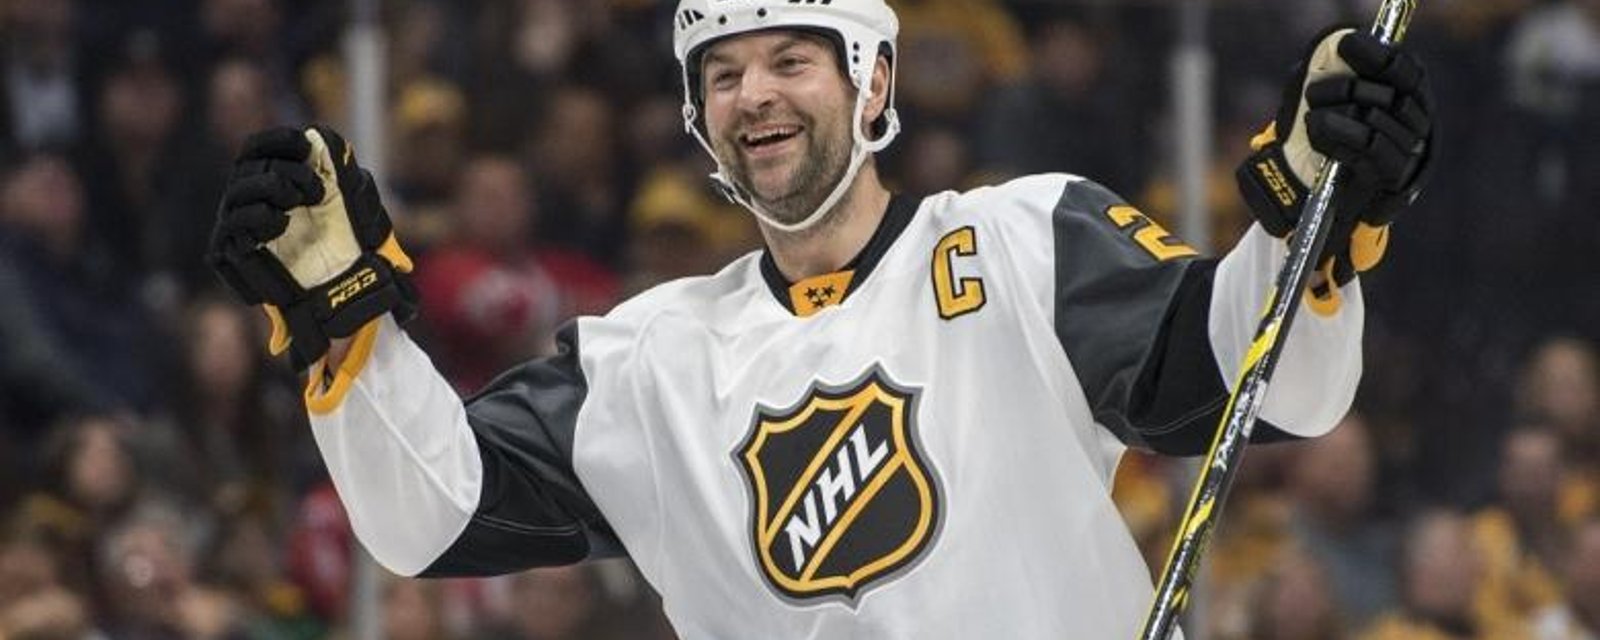 John Scott will play his first game since the birth of his twins.